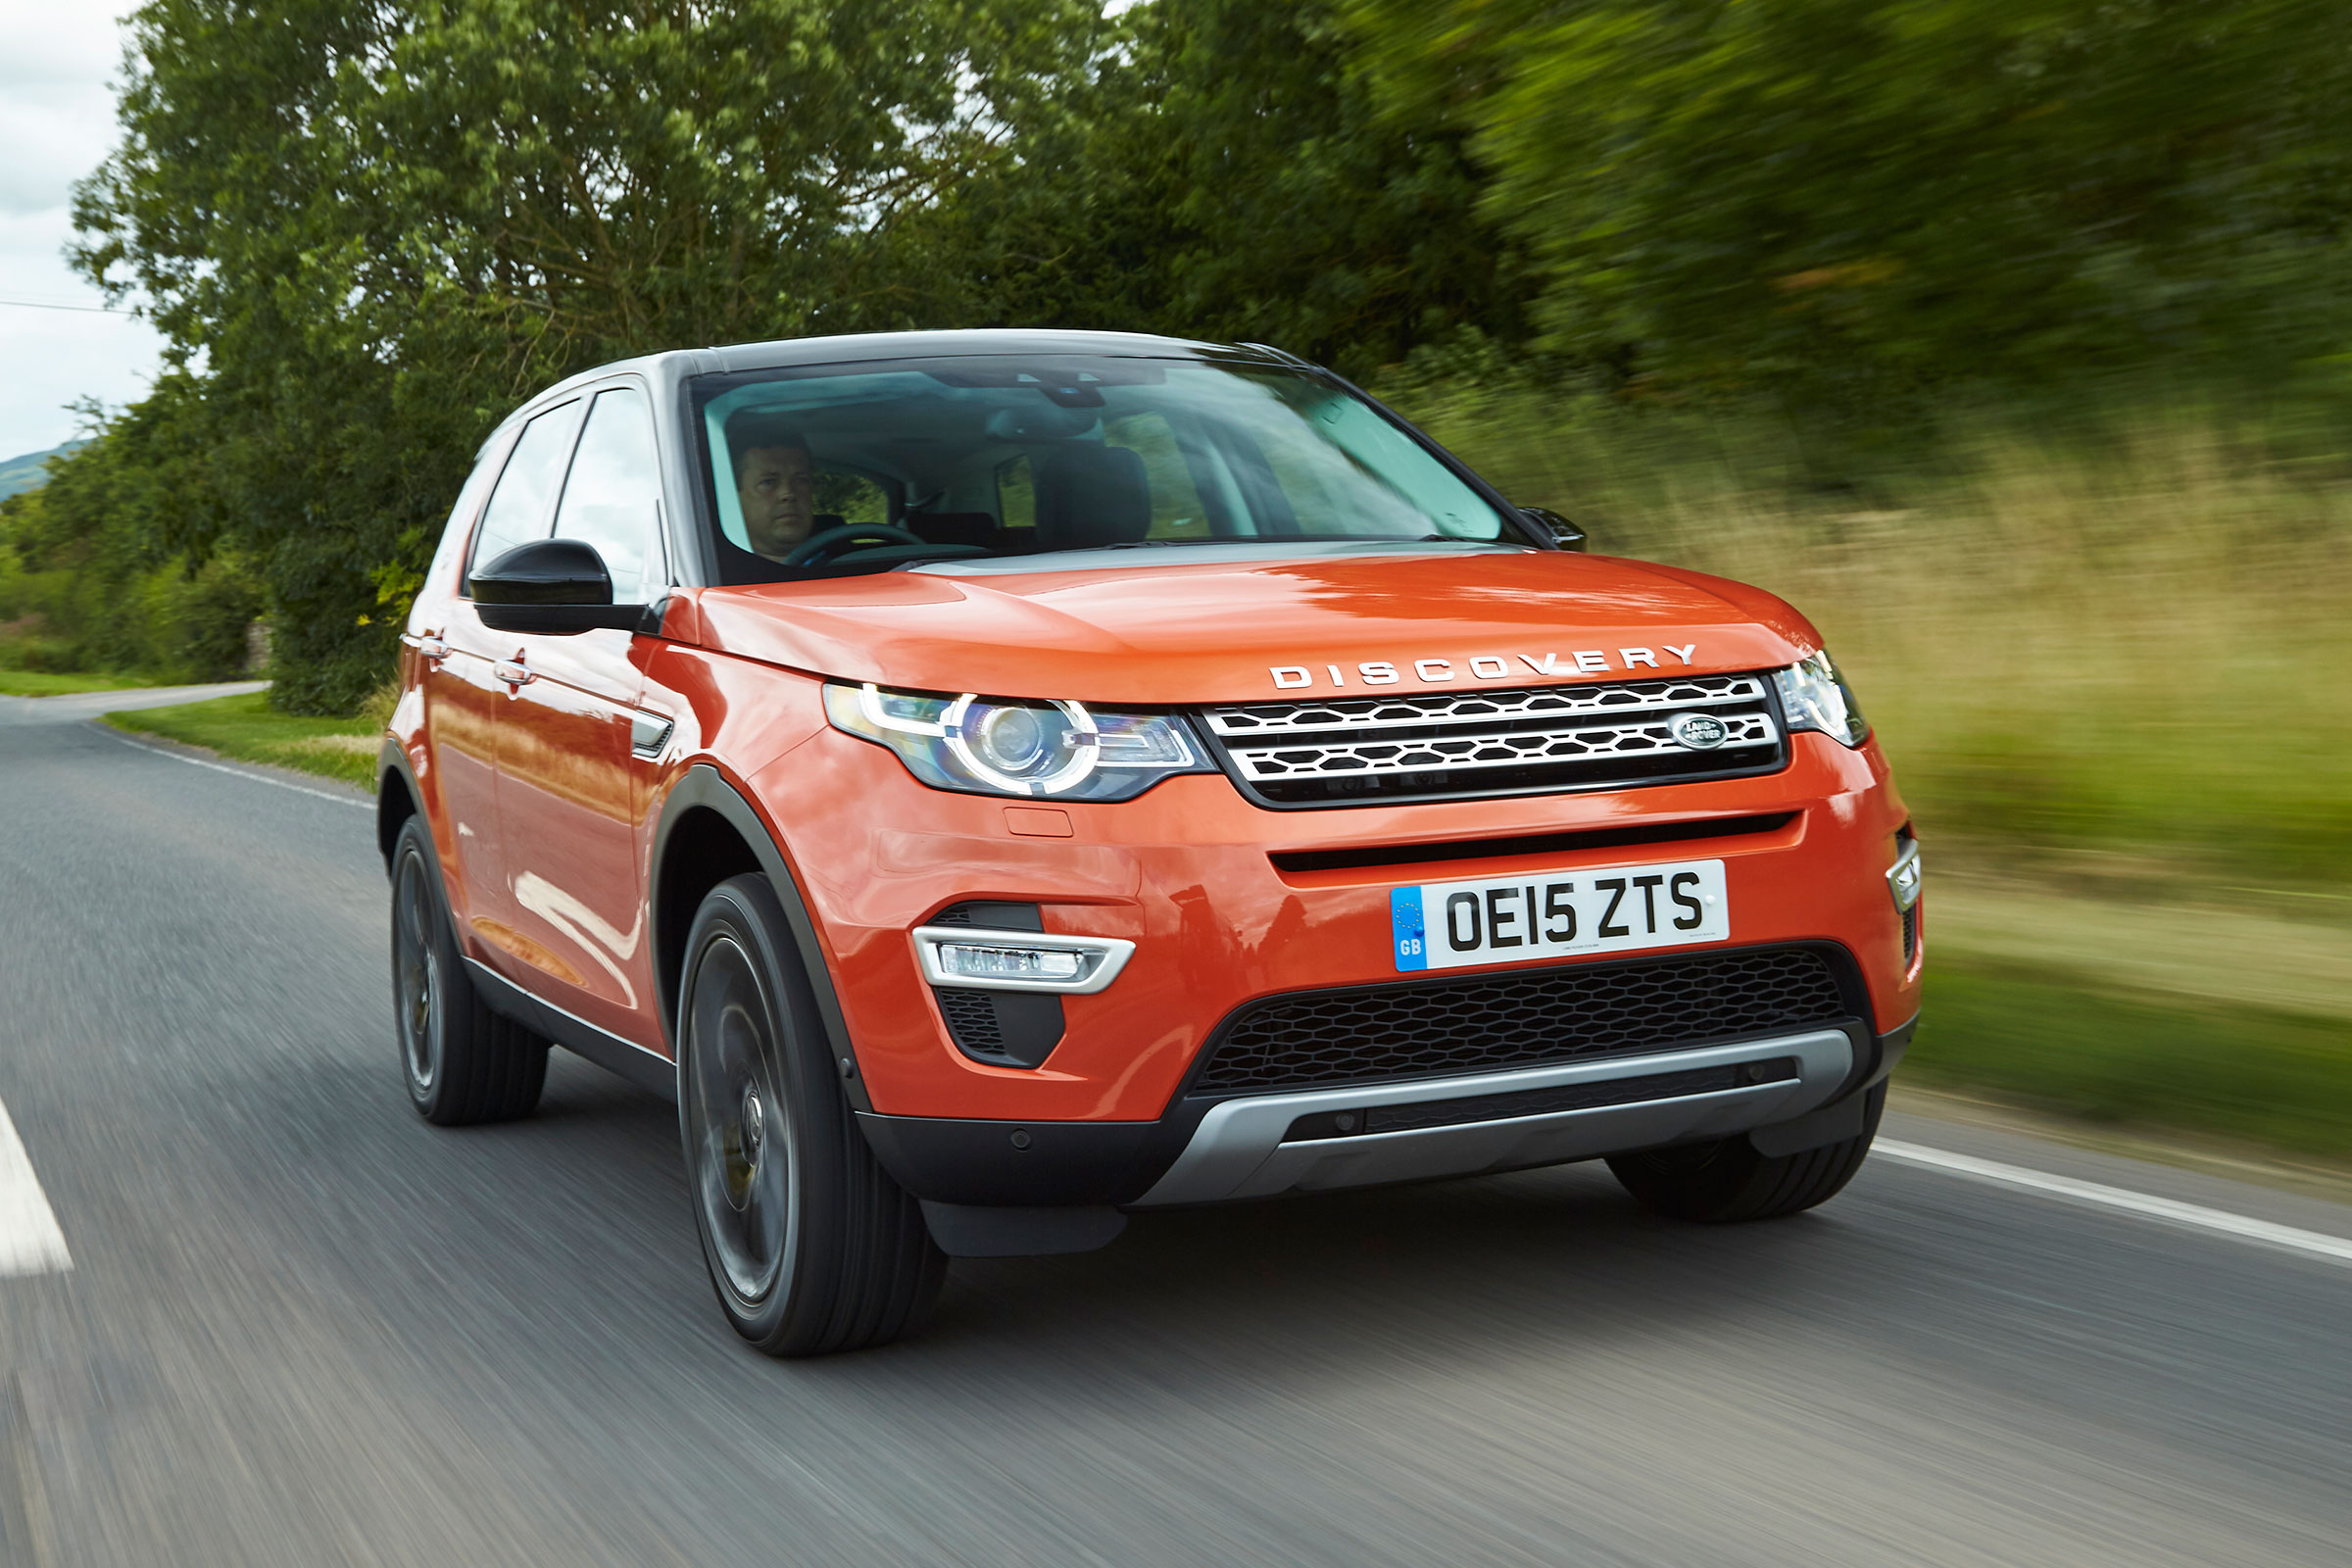 Land Rover Discovery Sport 2.0 Ingenium diesel review